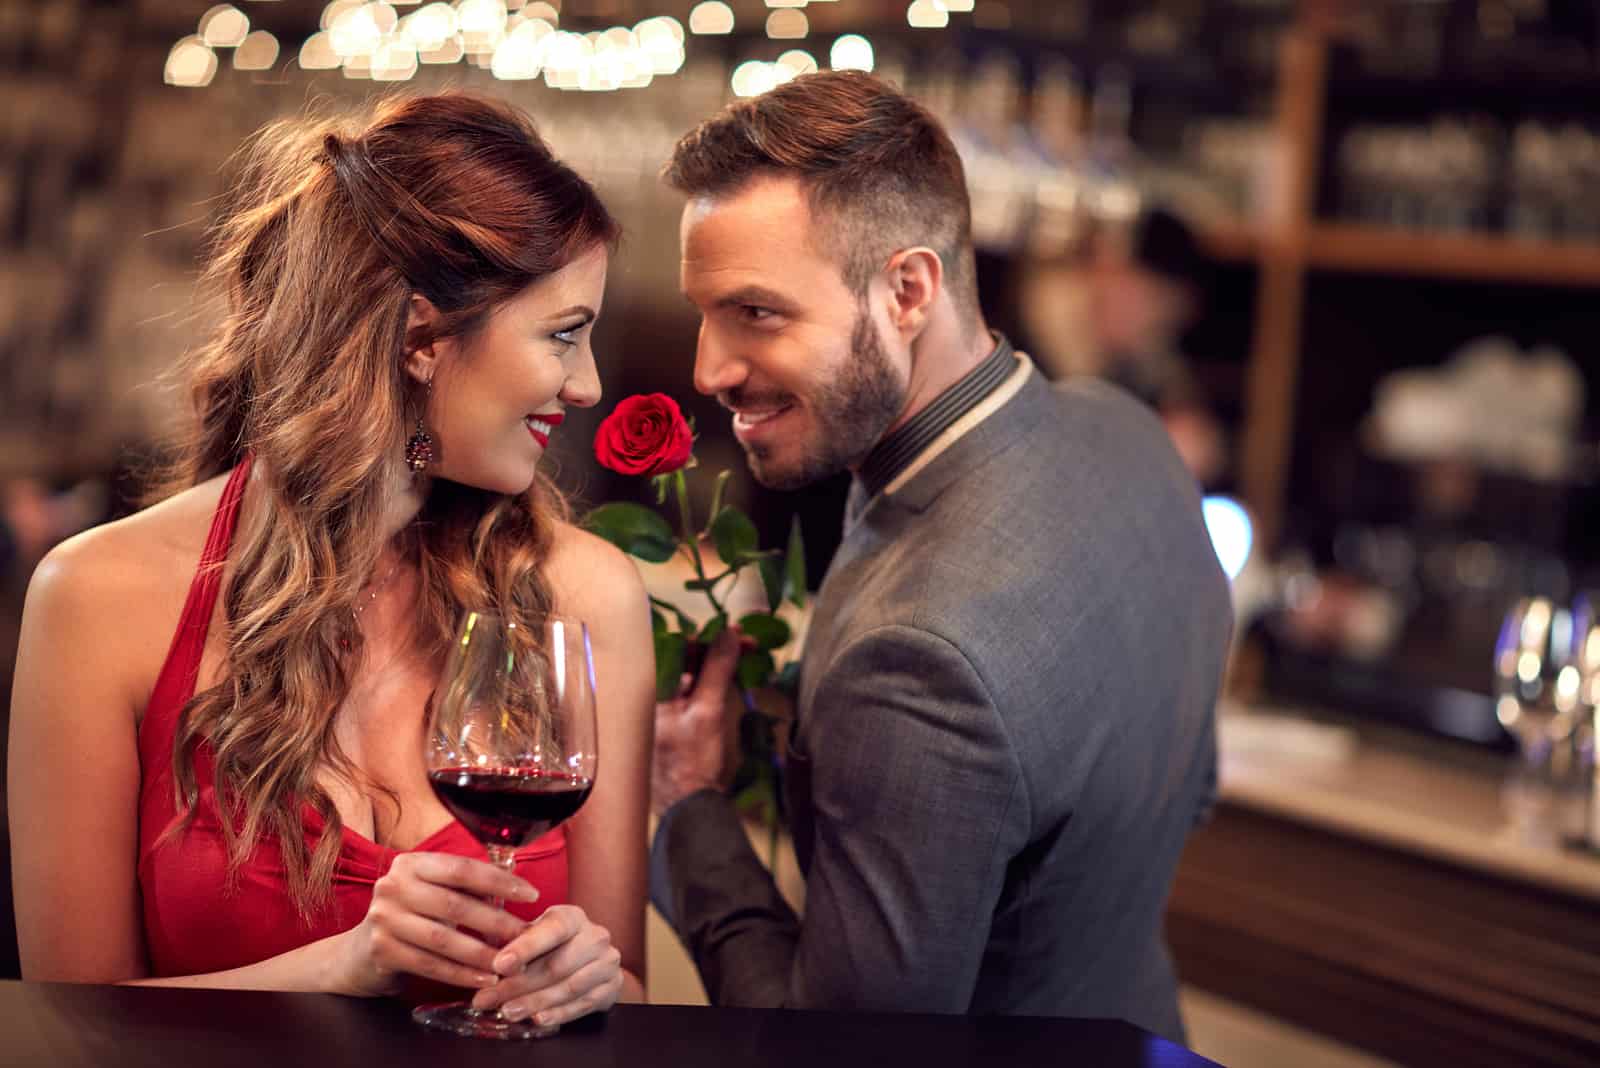 woman flirting with a man in a bar